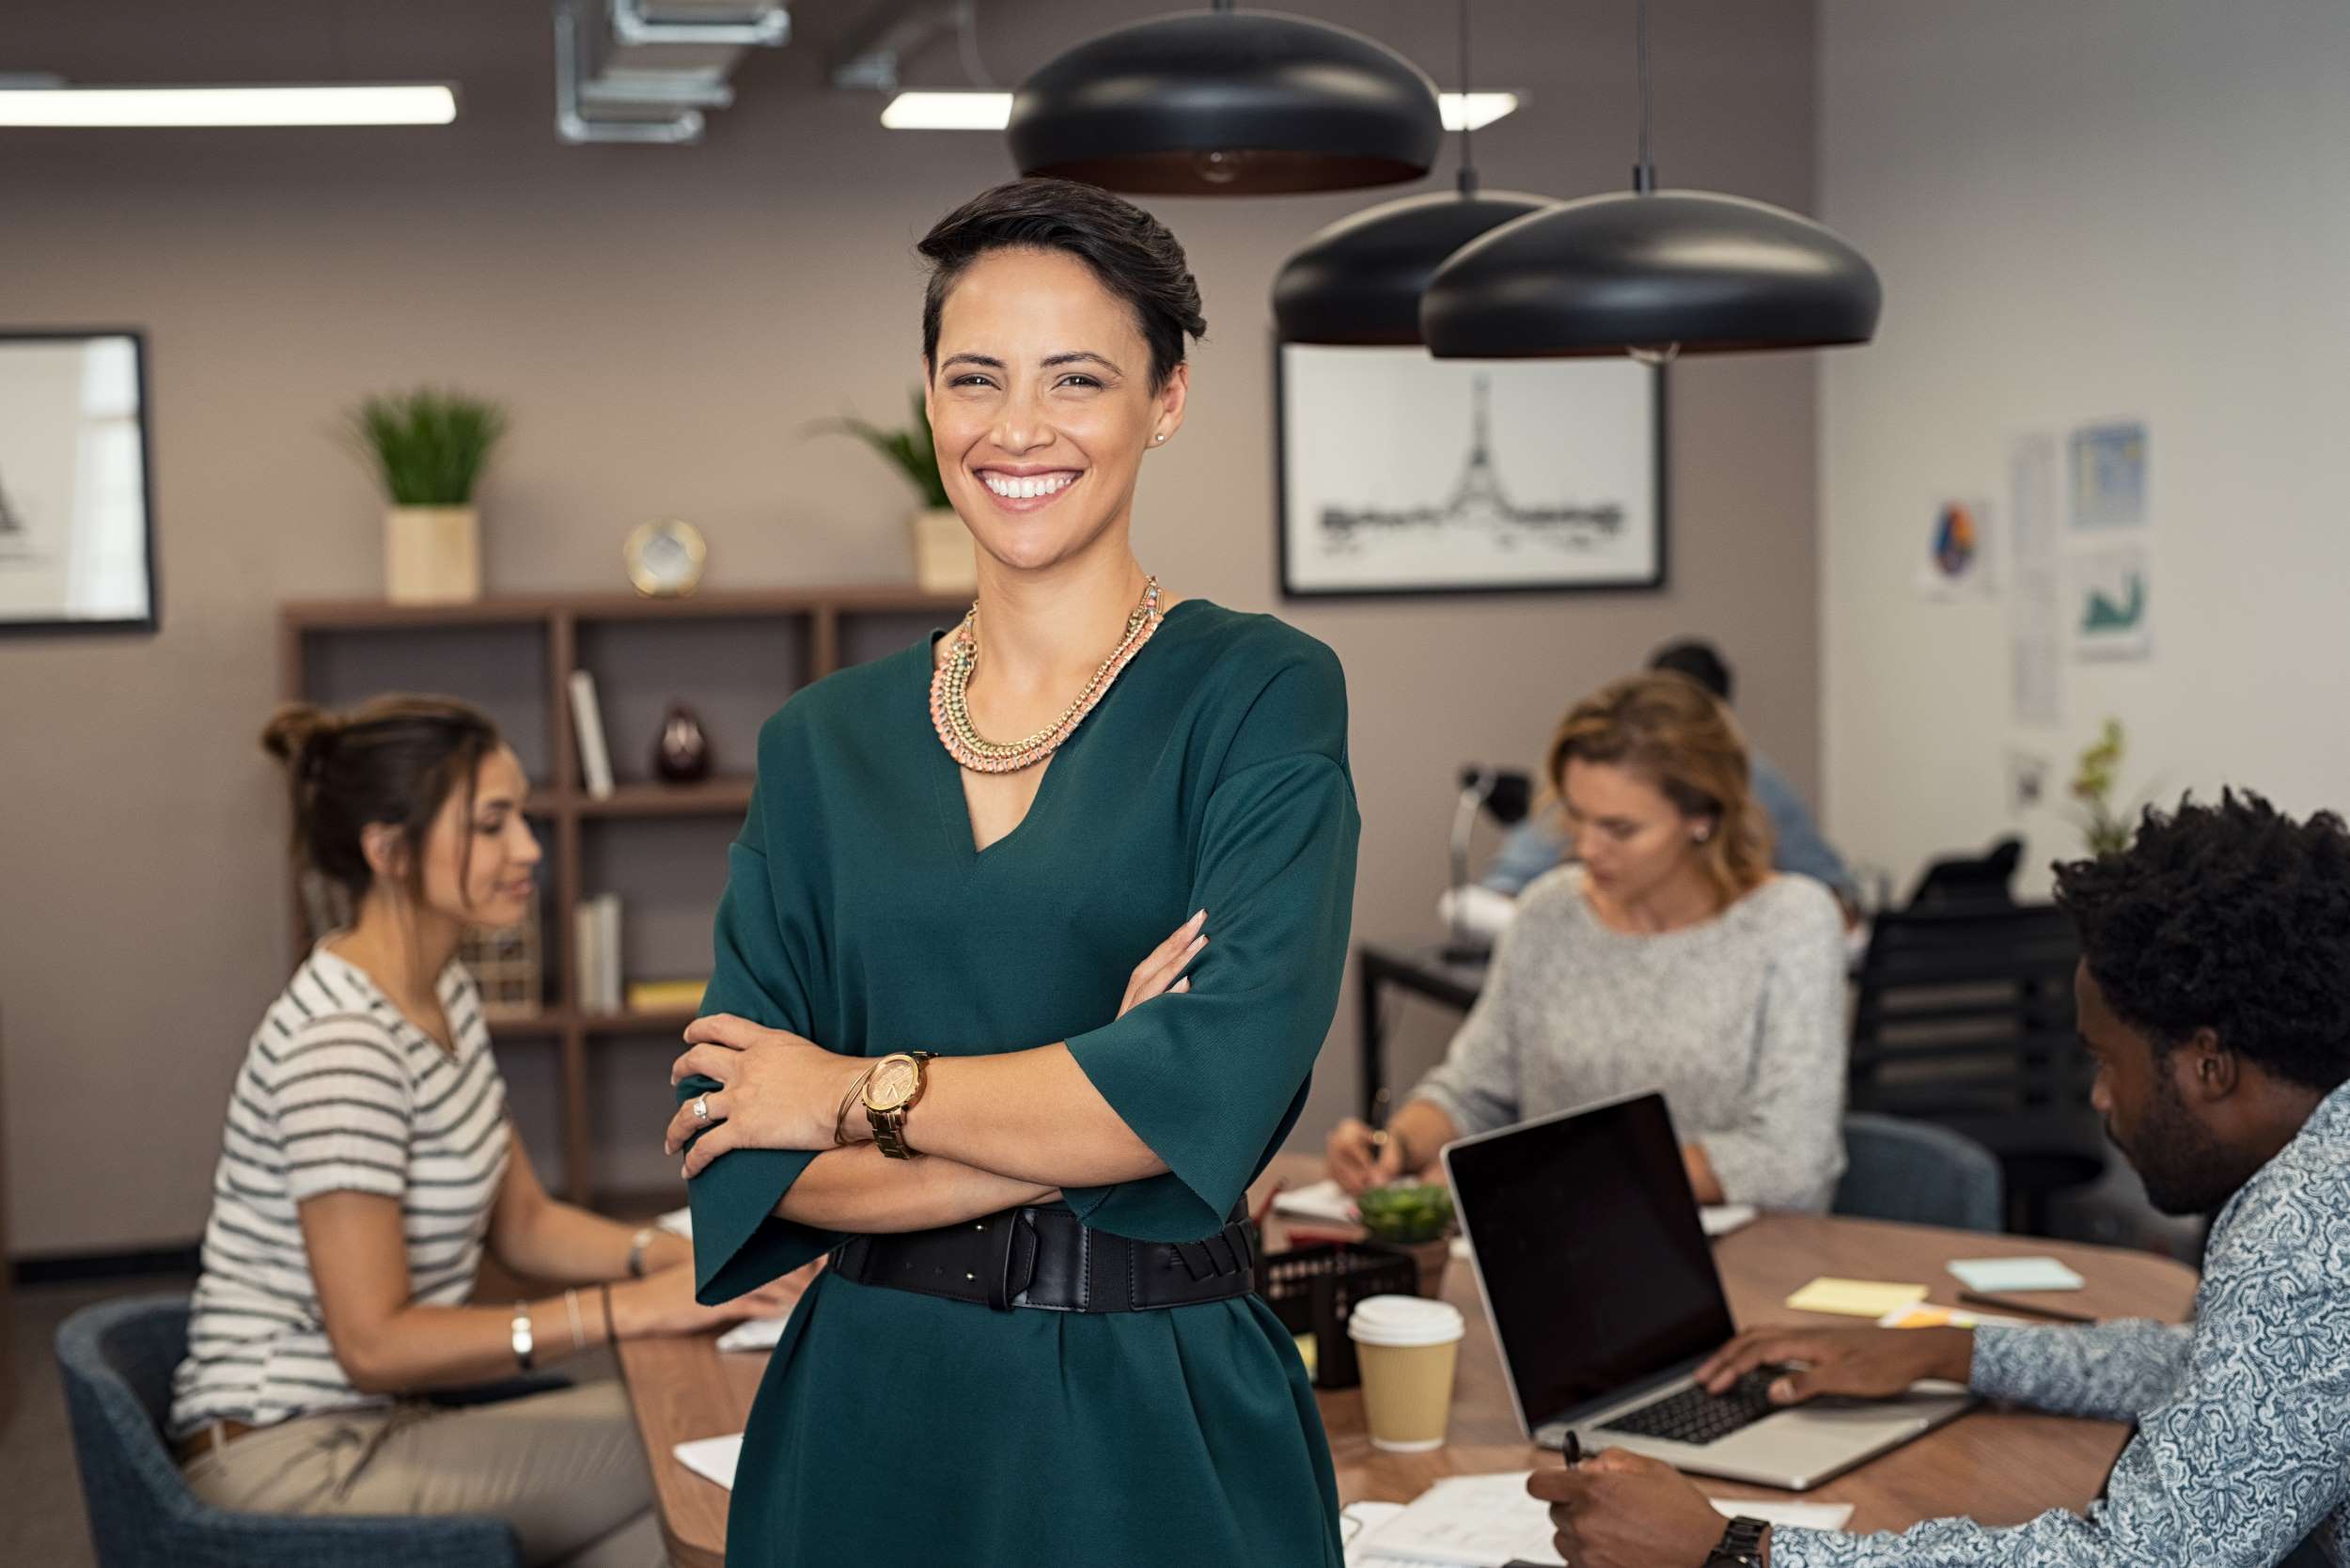 Smiling Woman Standing in an Office